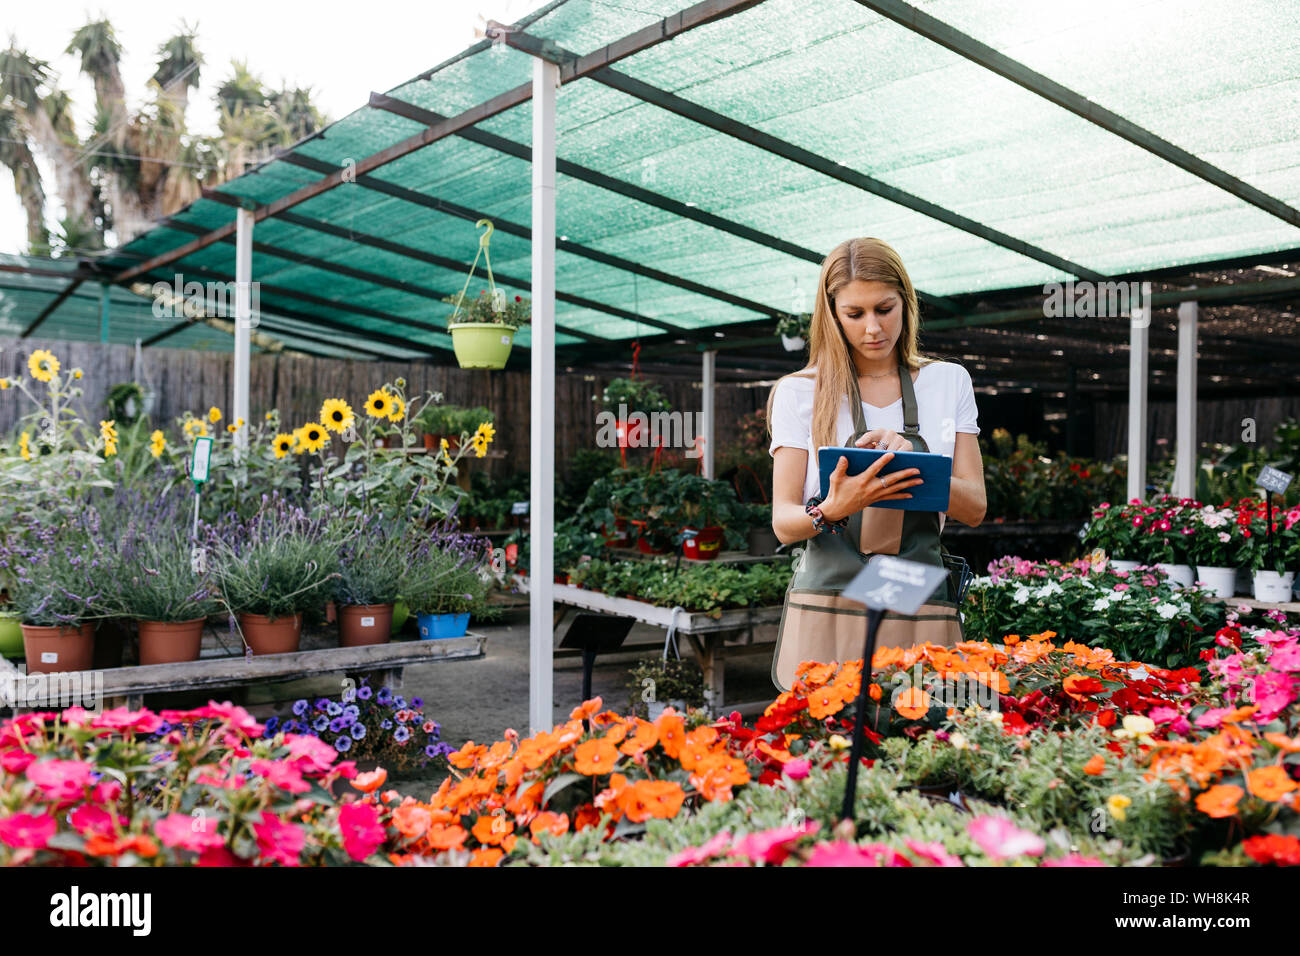 Female worker in a garden center using a tablet Stock Photo